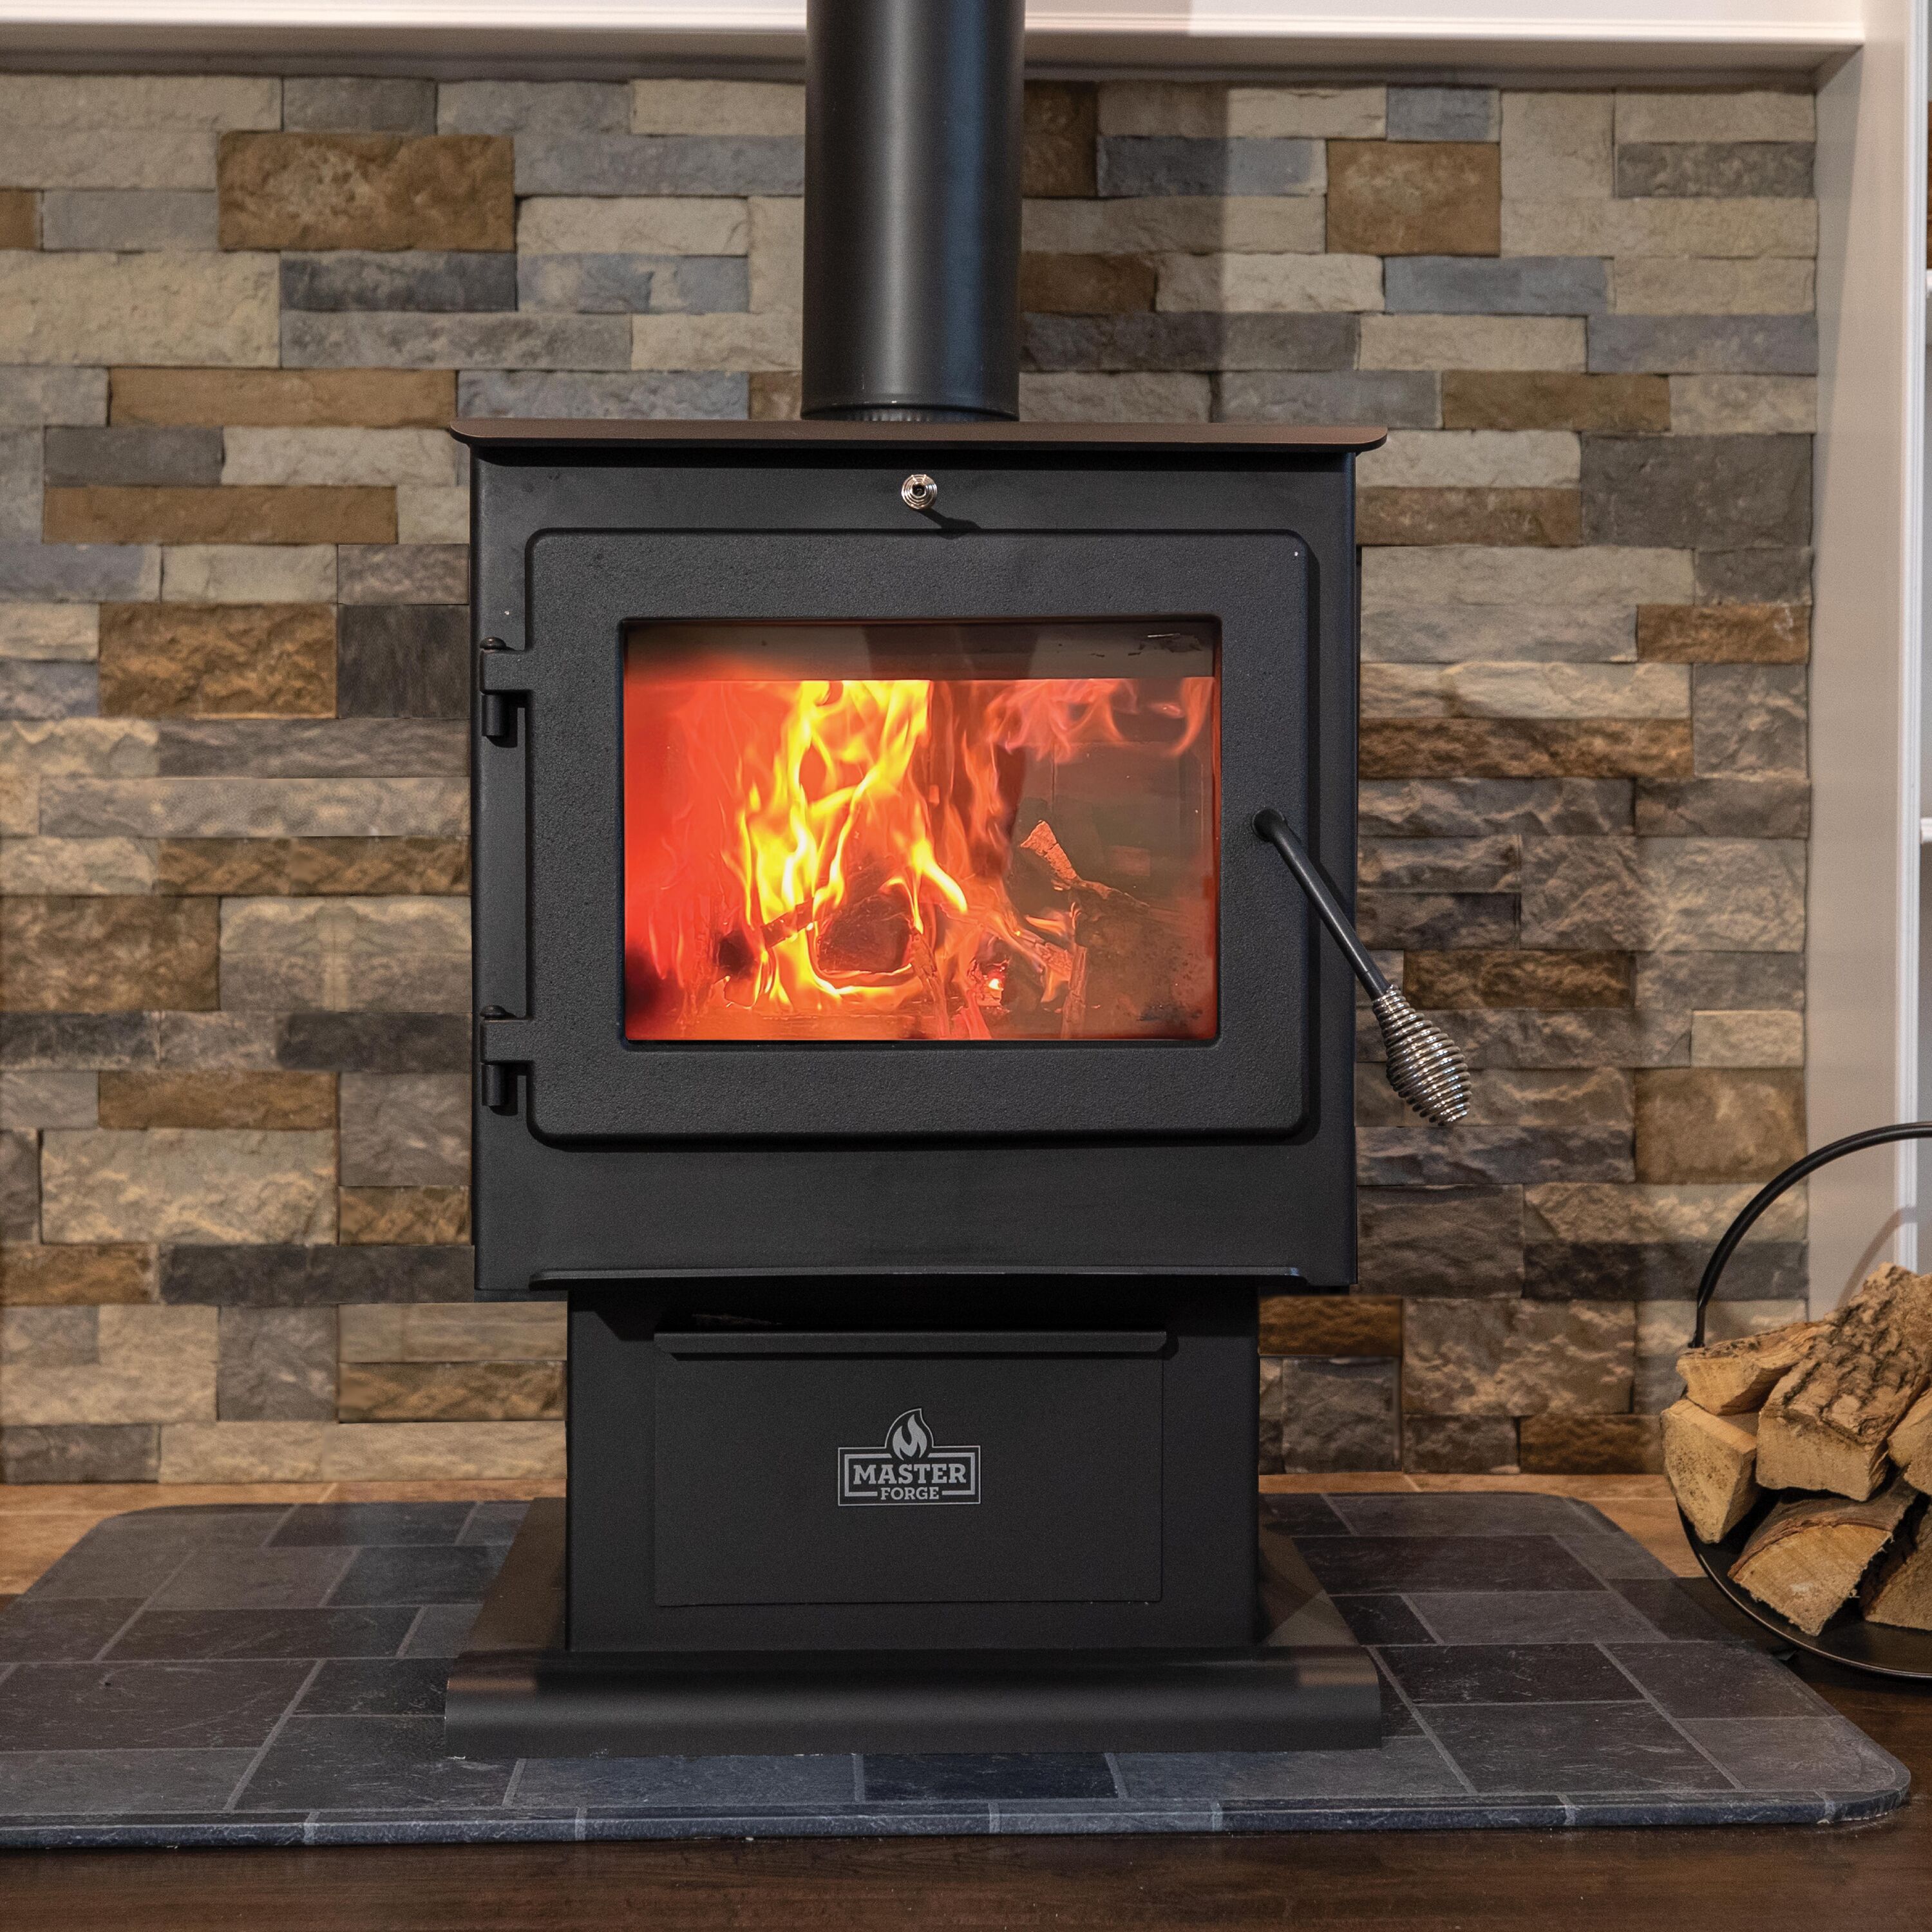 Vogelzang 800-sq ft Heating Area Firewood and Fire Logs Wood Stove at